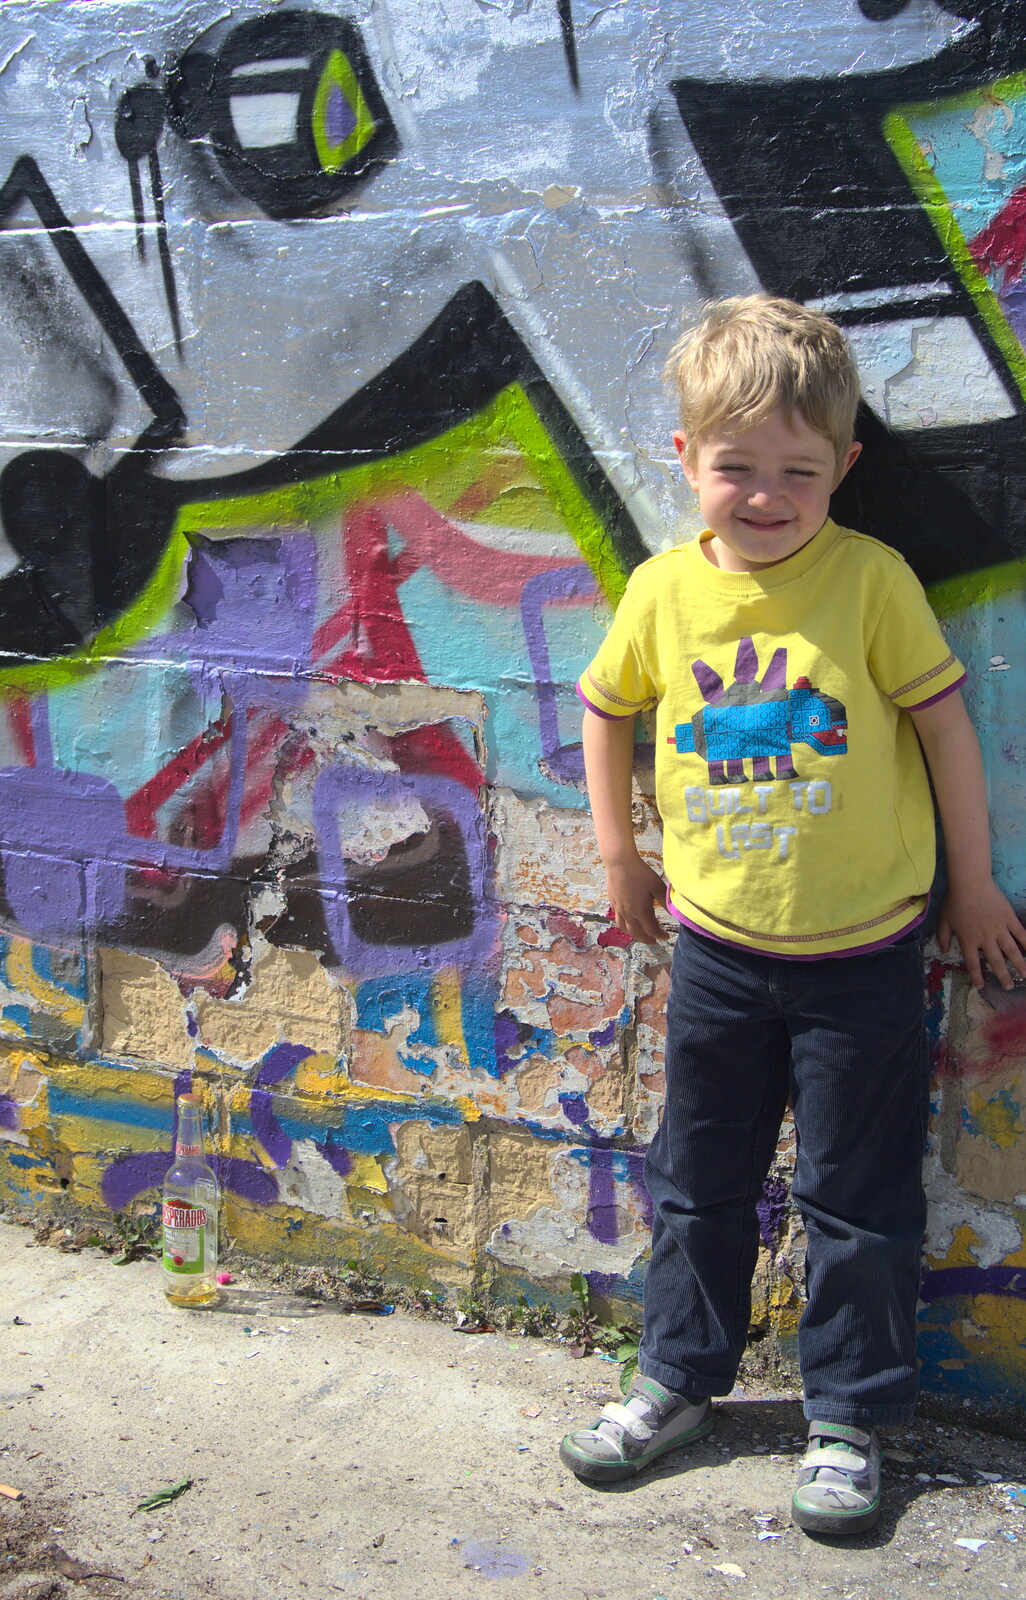 Fred leans on a painted wall from The Dereliction of HMSO, Botolph Street, Norwich - 26th May 2013